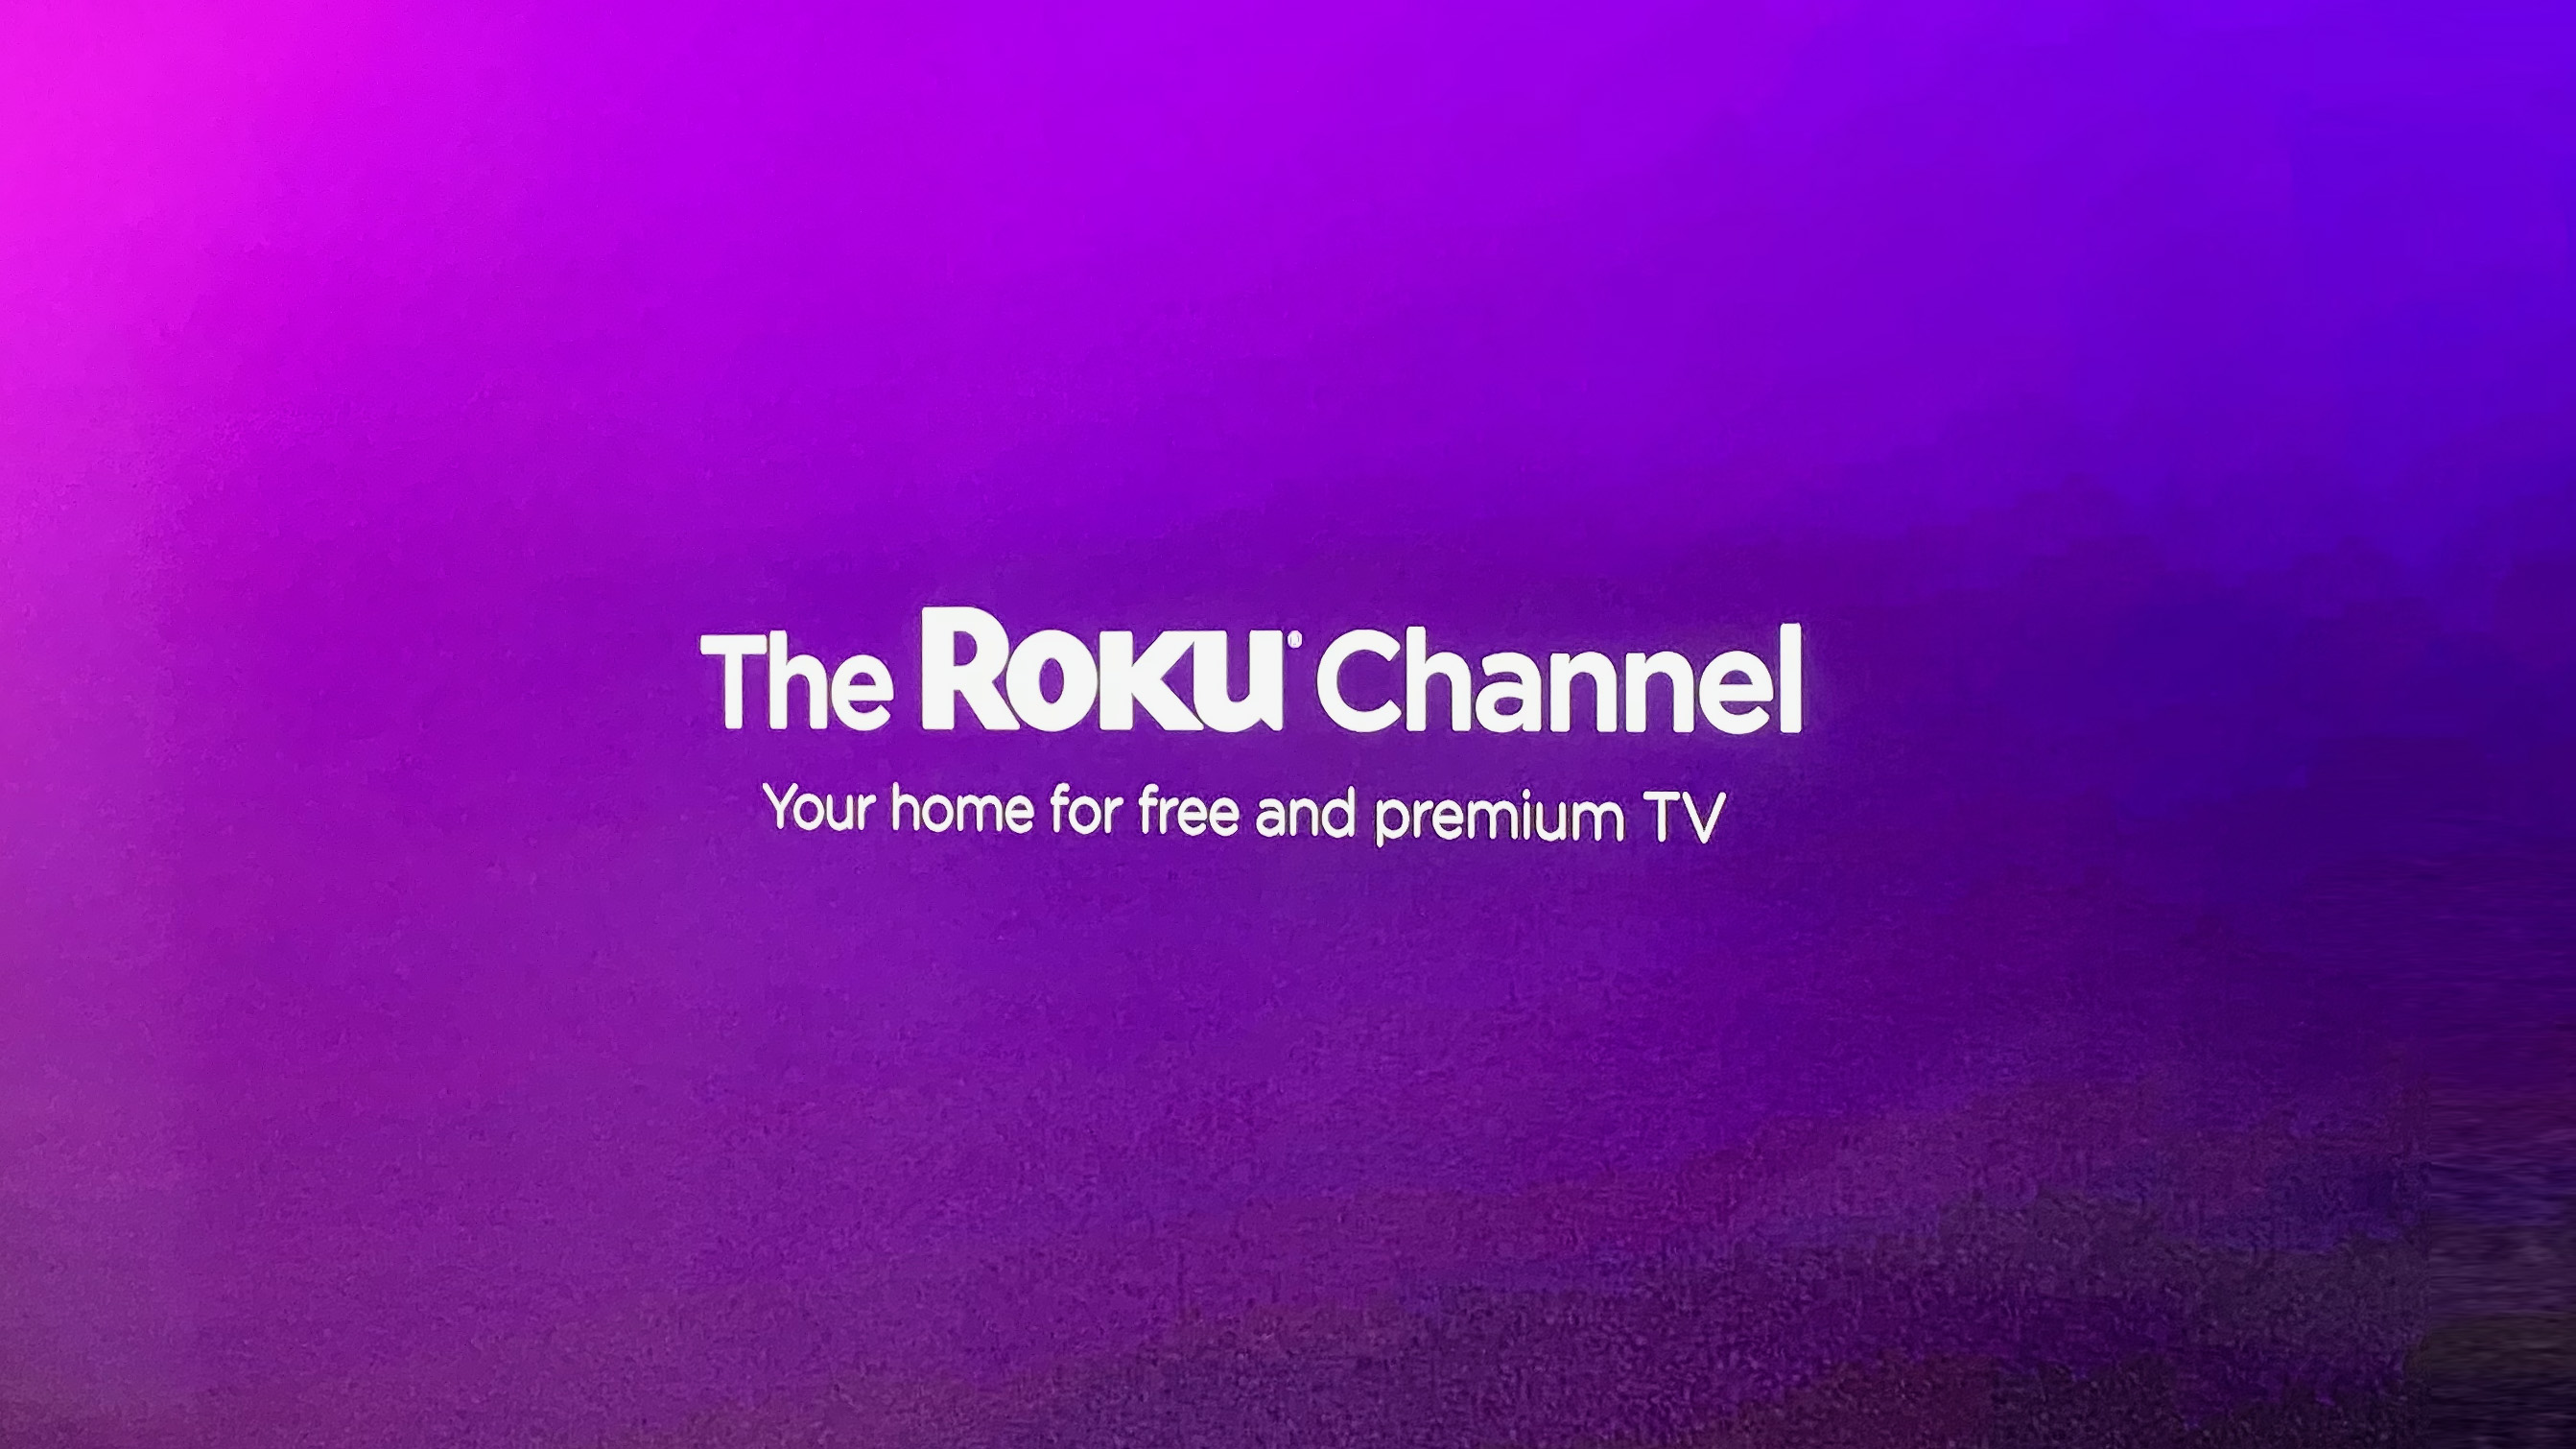 How to watch The Roku Channel on Amazon Fire TV What to Watch